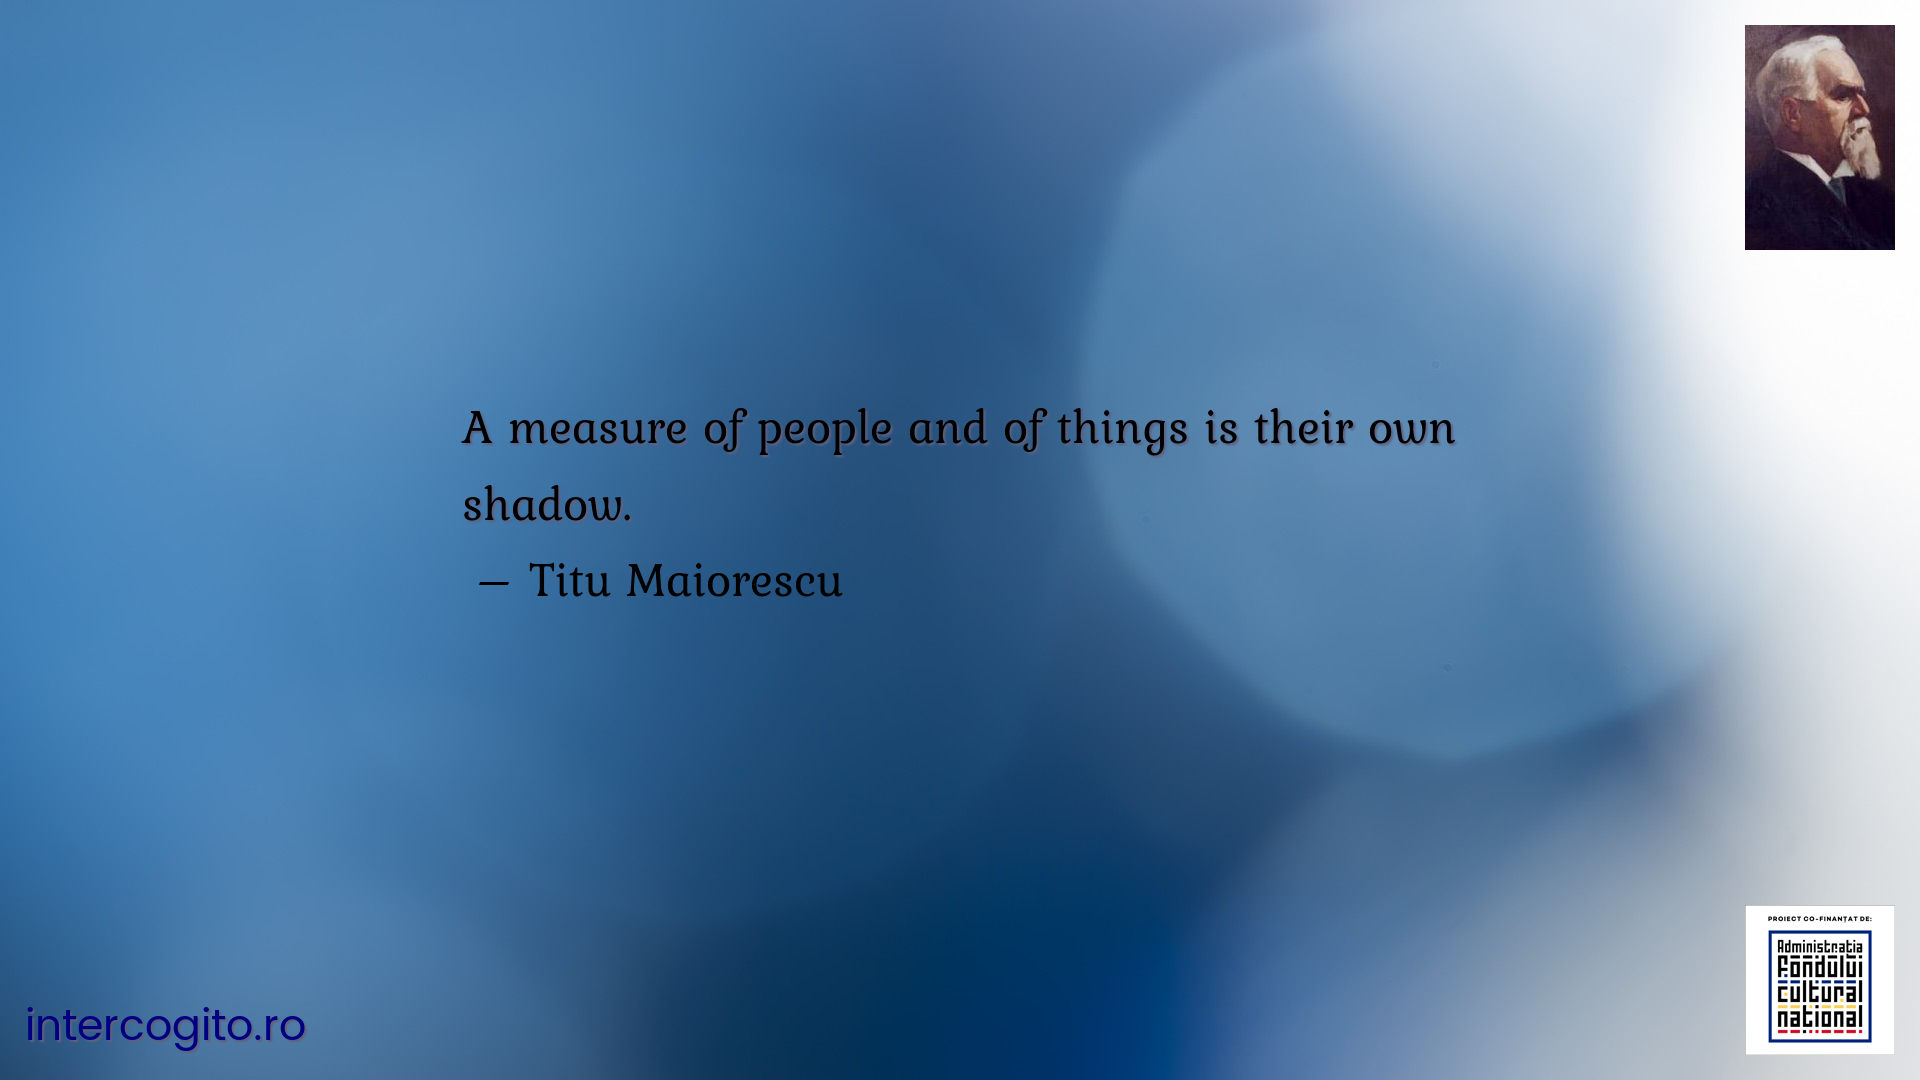 A measure of people and of things is their own shadow.